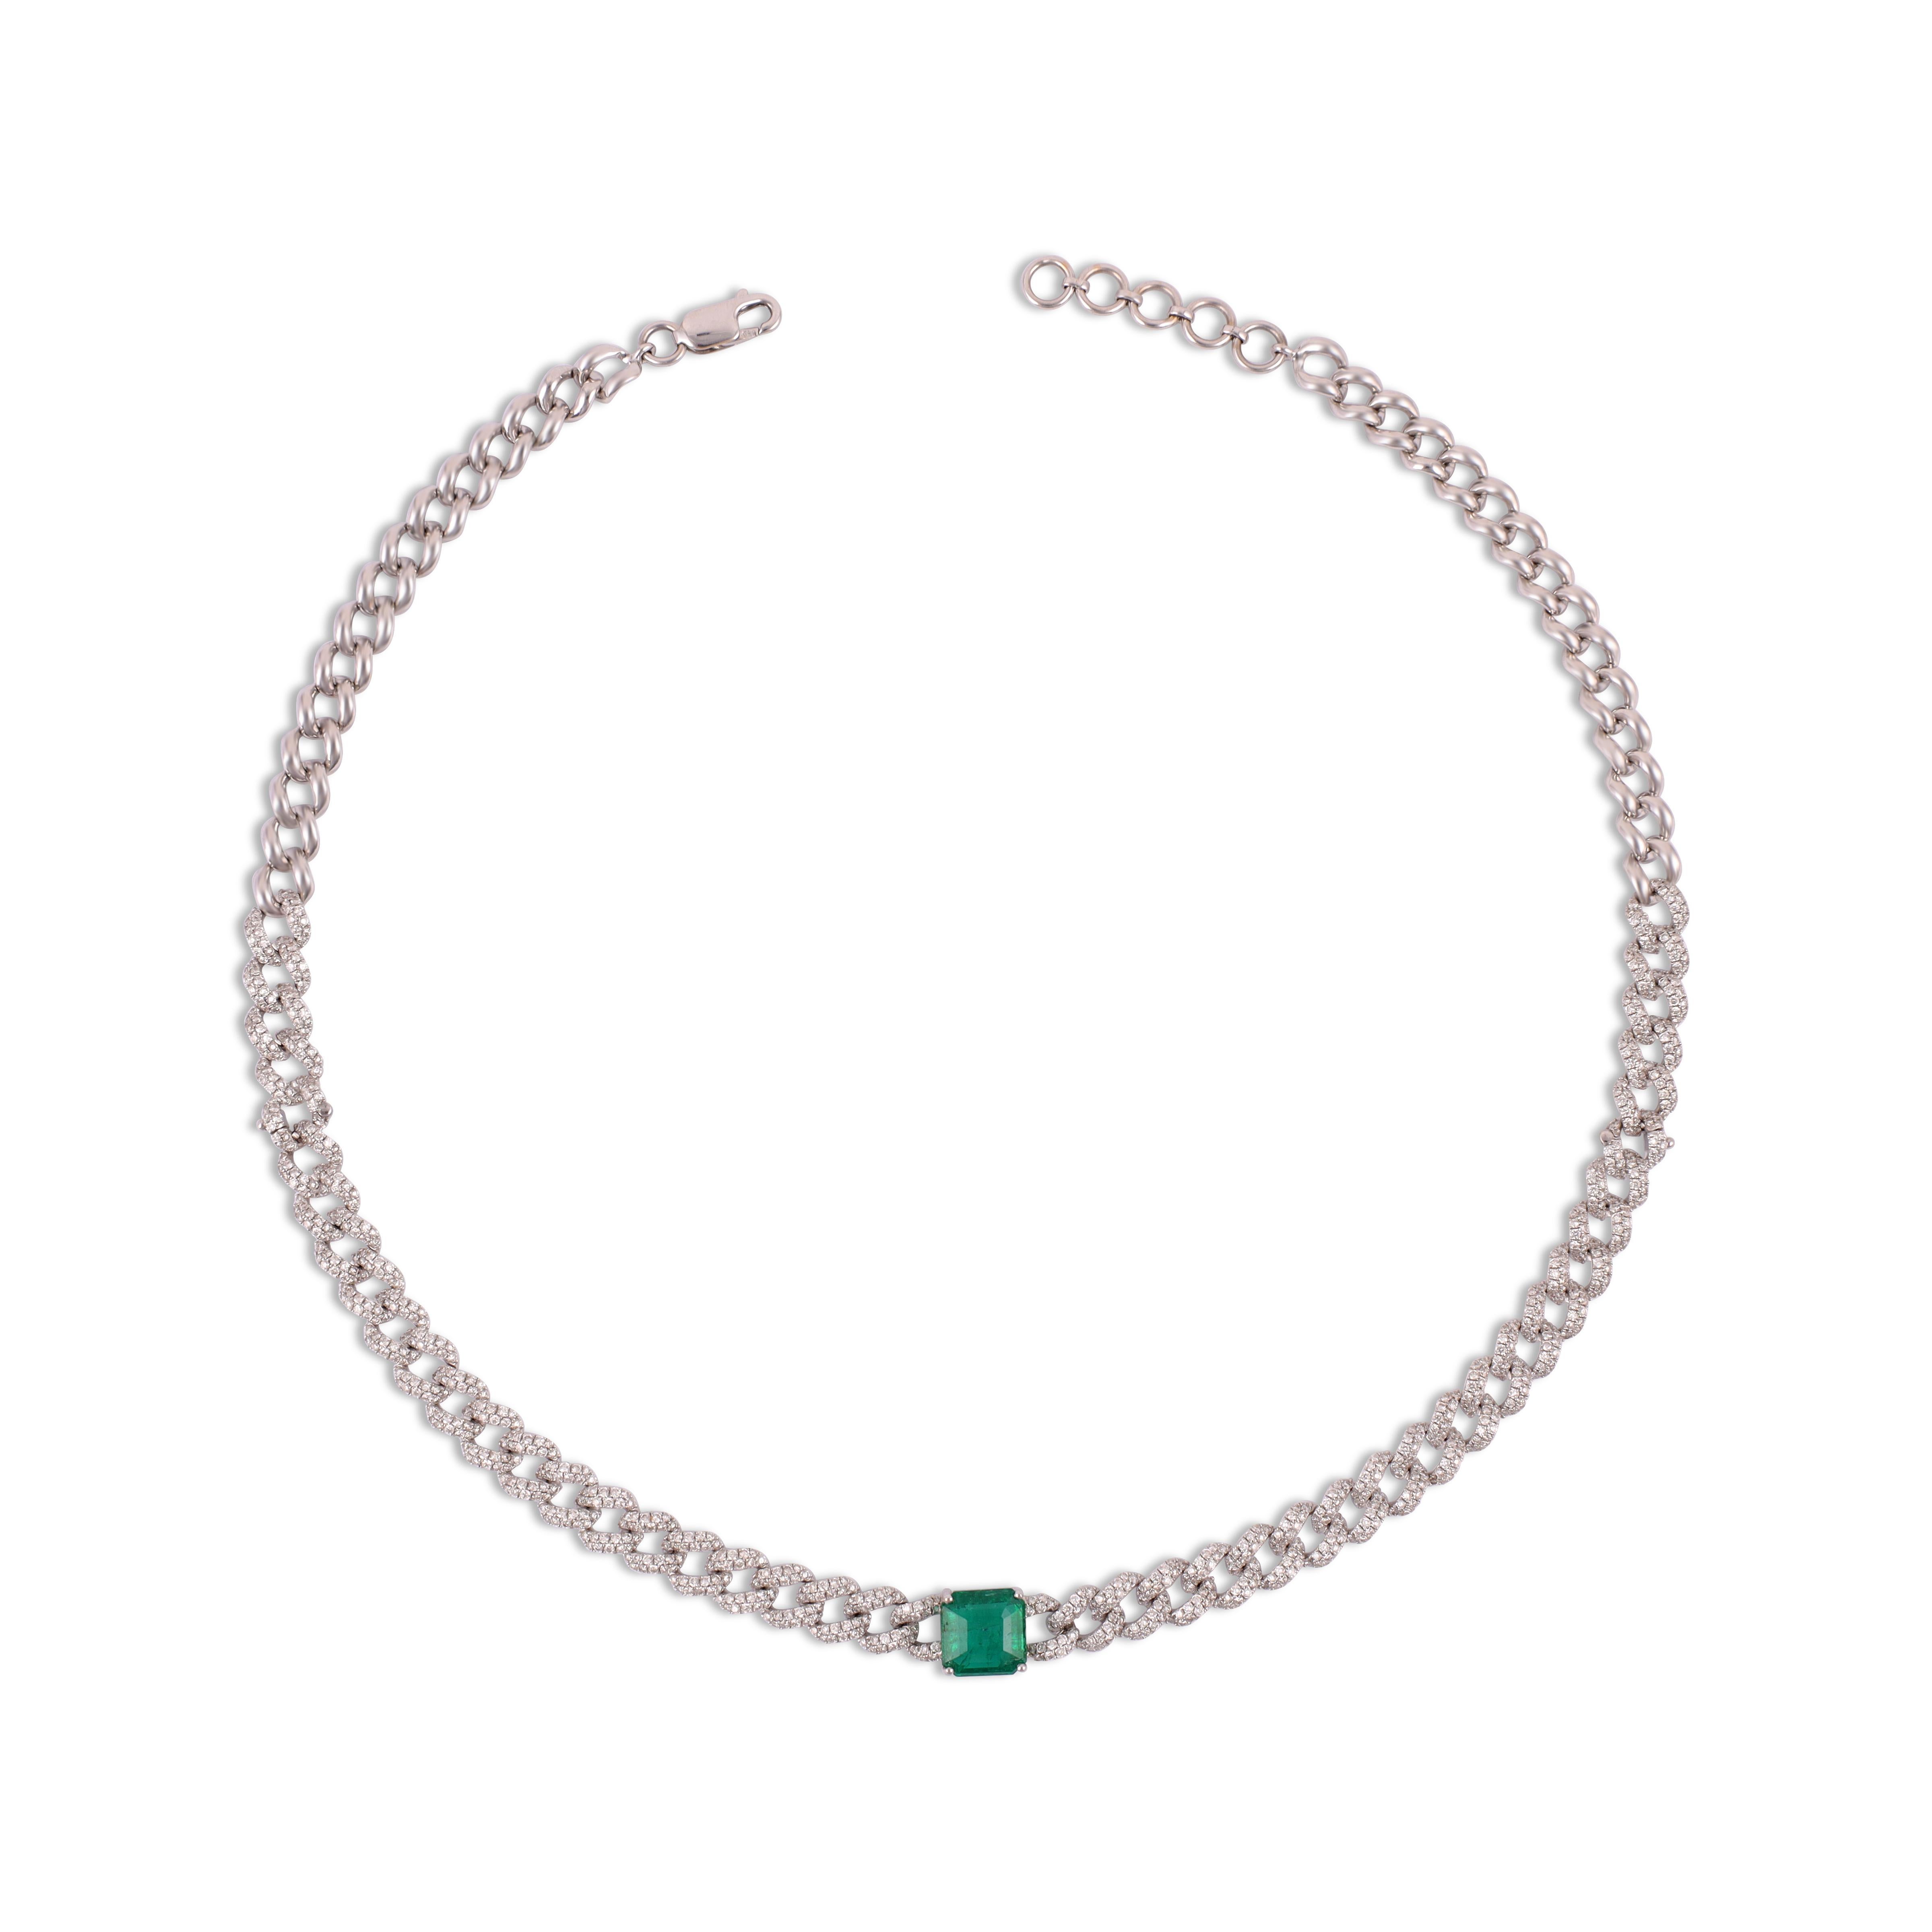 A wonderful 18 carat white gold set showcasing a circular link necklace and matching bracelet.

Diamond : 4.60 Carat
Emerald  : 2.75 carat
White Gold :   25.48gm 

Can be customize according to costumer.
  

